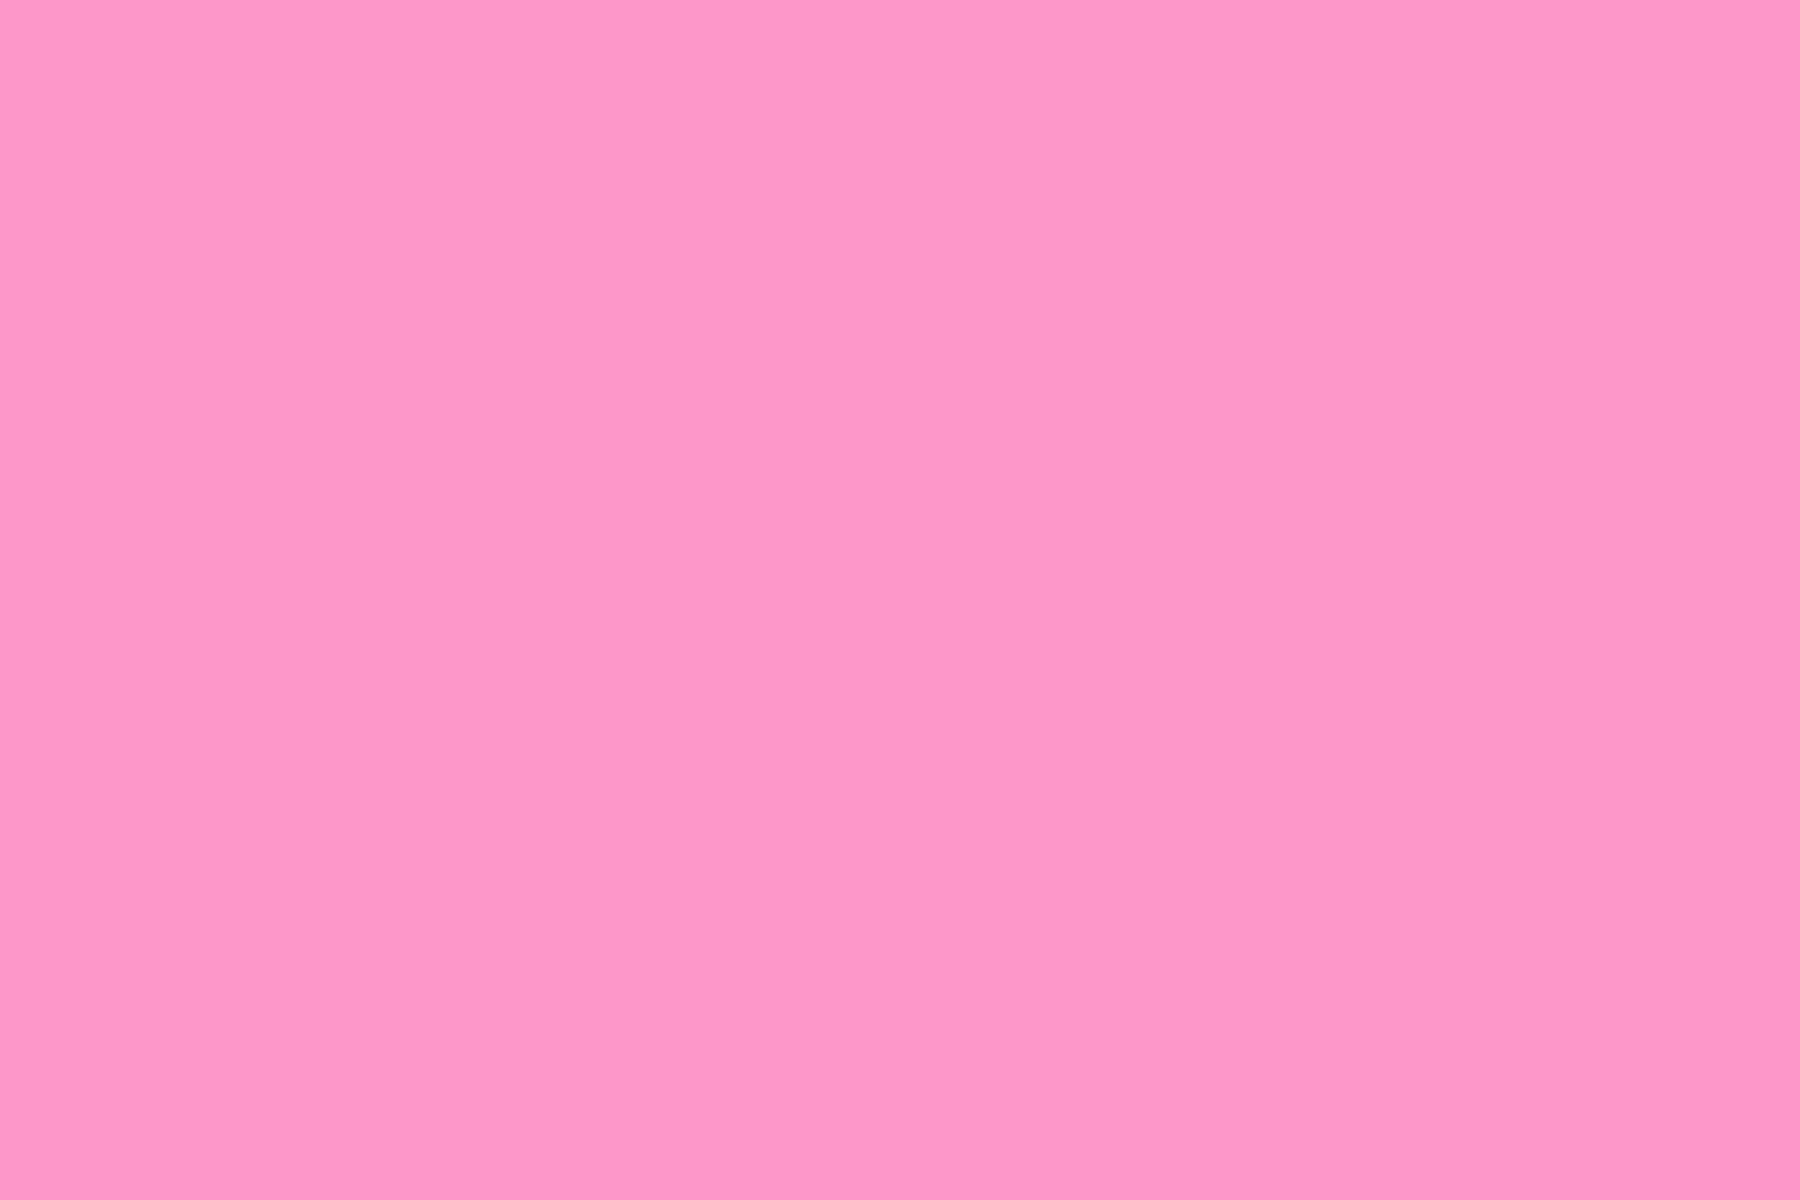 Download Plain Pink Background 19122 1800x1200 px High Resolution